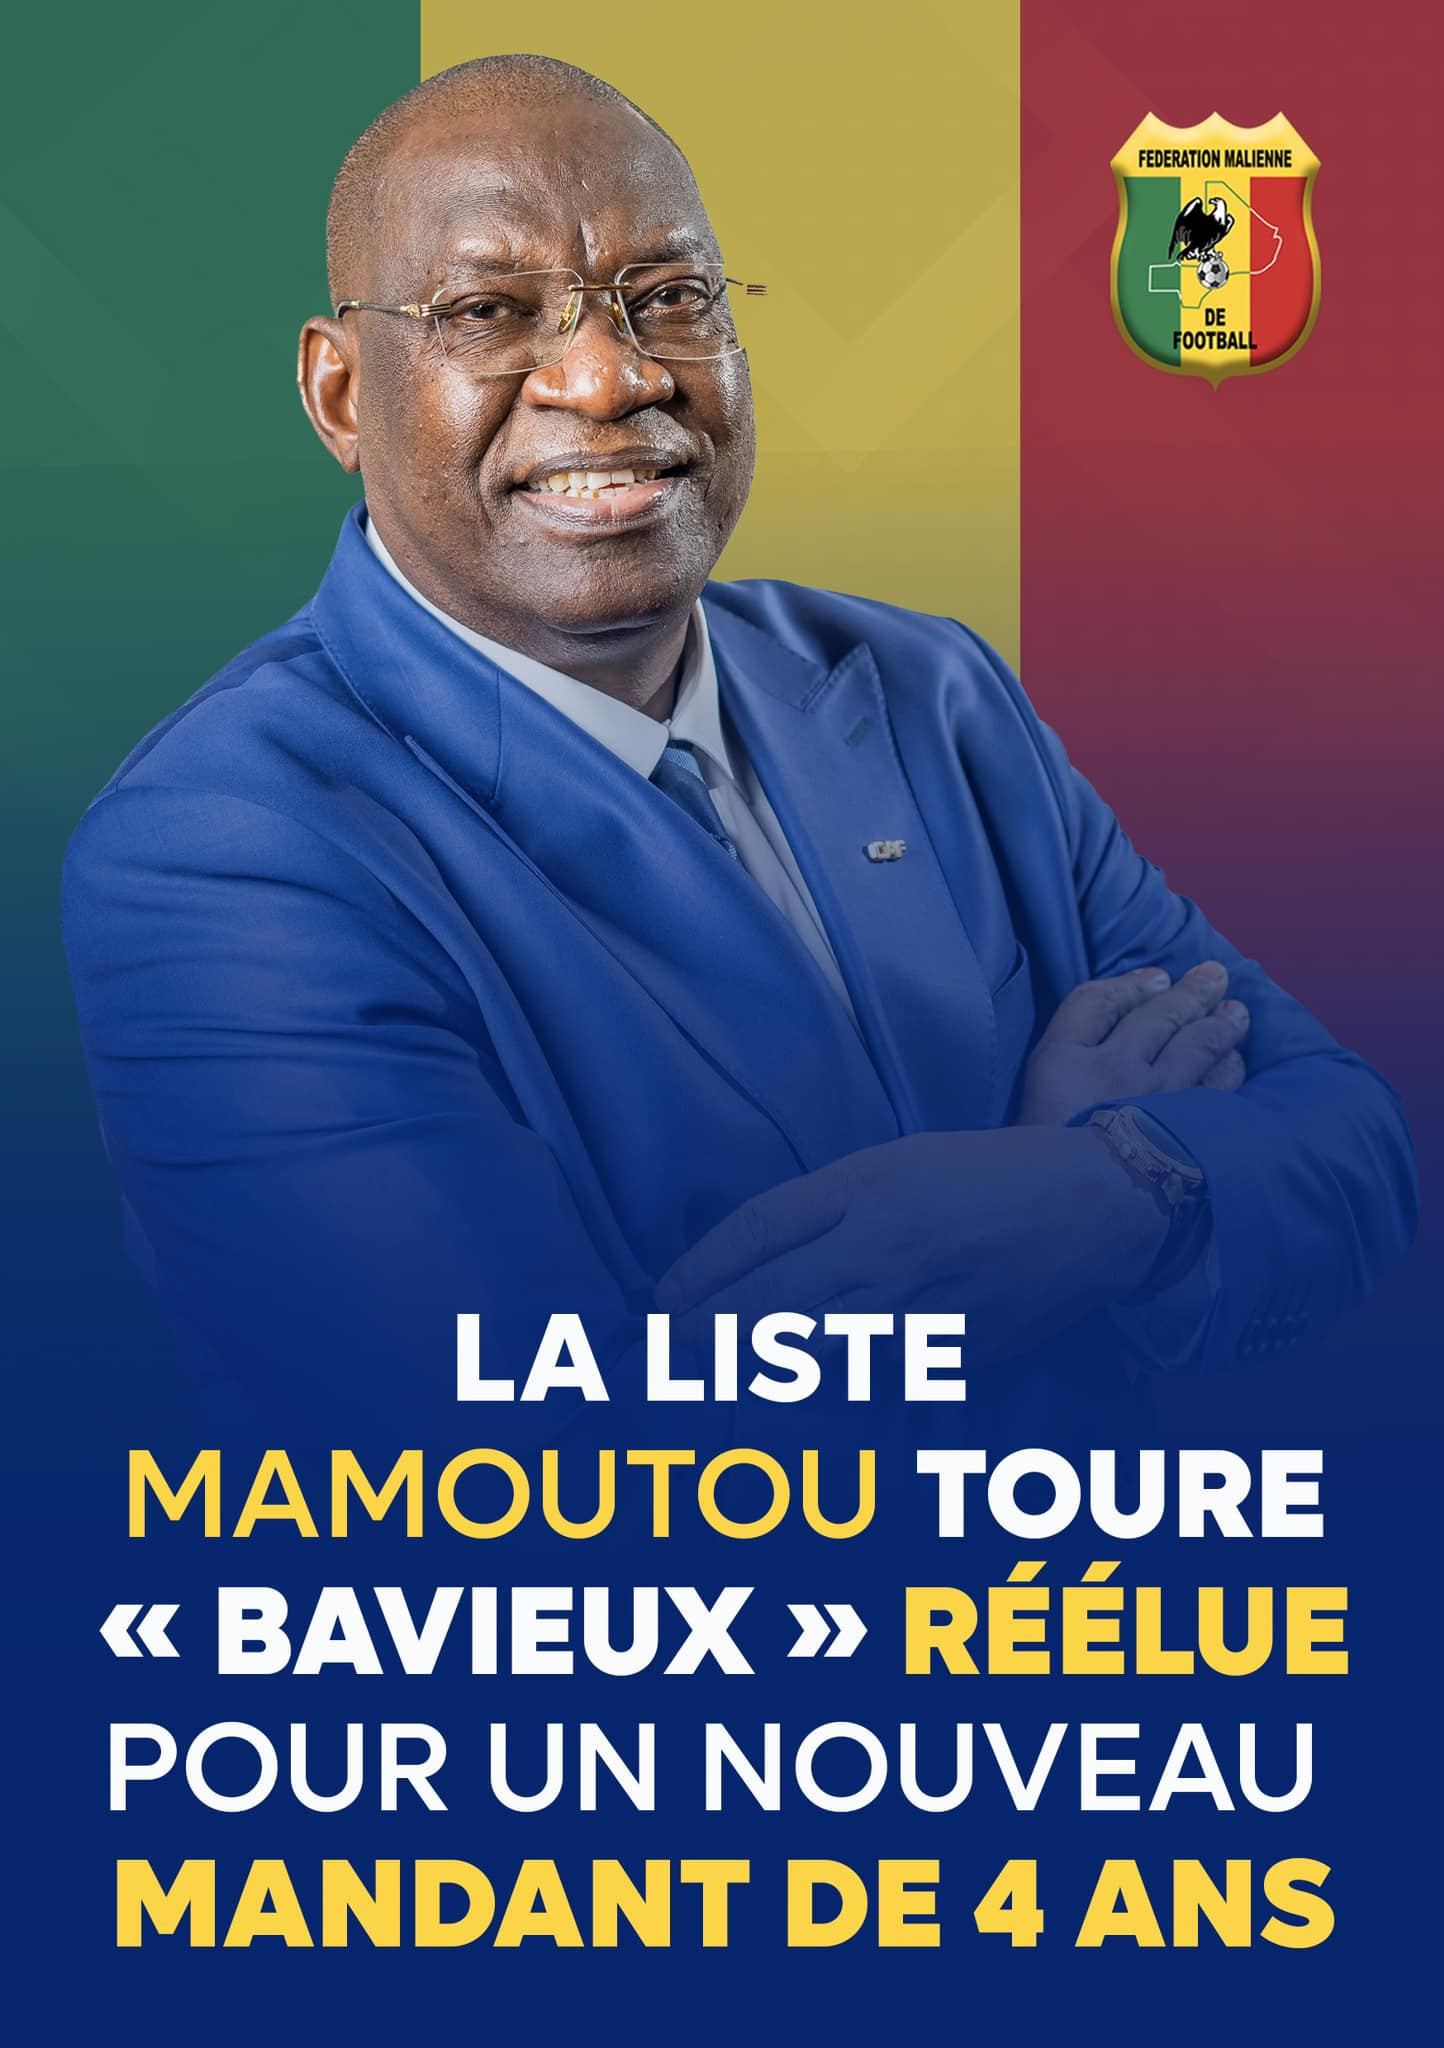 Femafoot President Mamoutou Touré has been re-elected unopposed despite facing embezzlement charges in Mali ©Femafoot